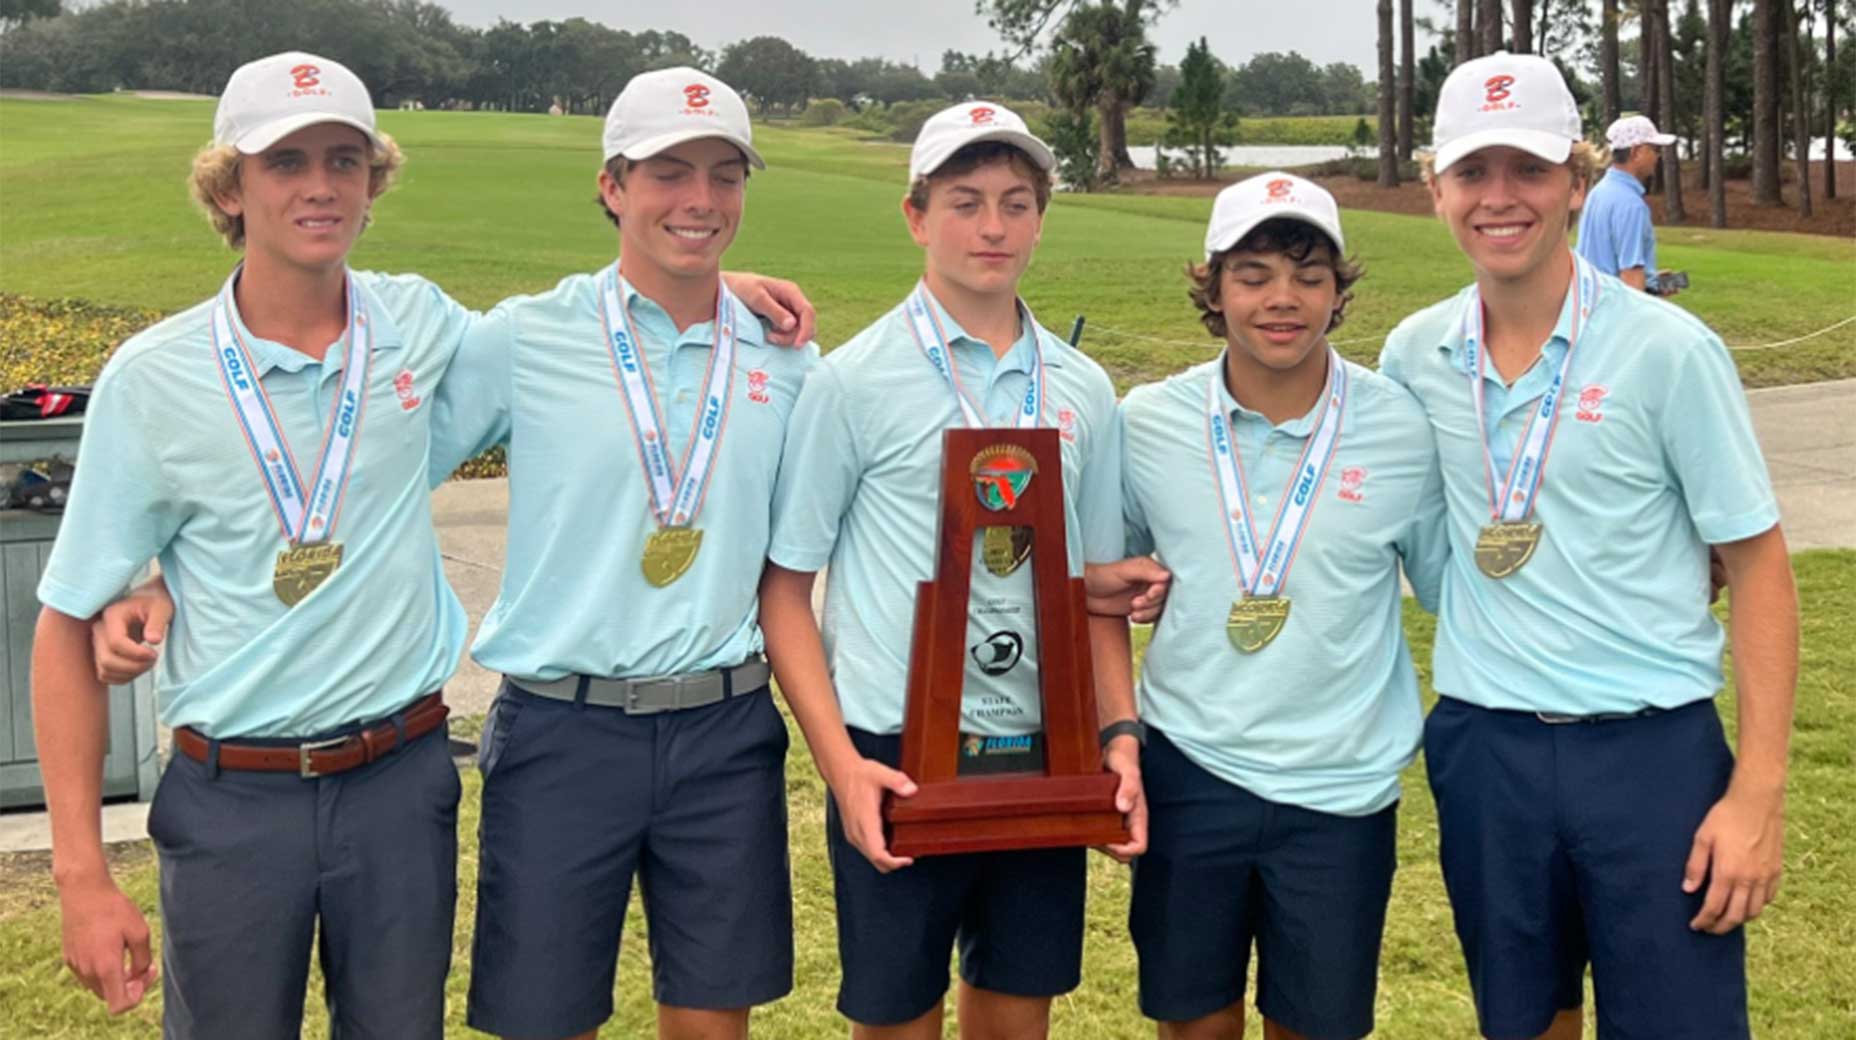 Charlie Woods Helps Lead High School Golf Team to State Championship